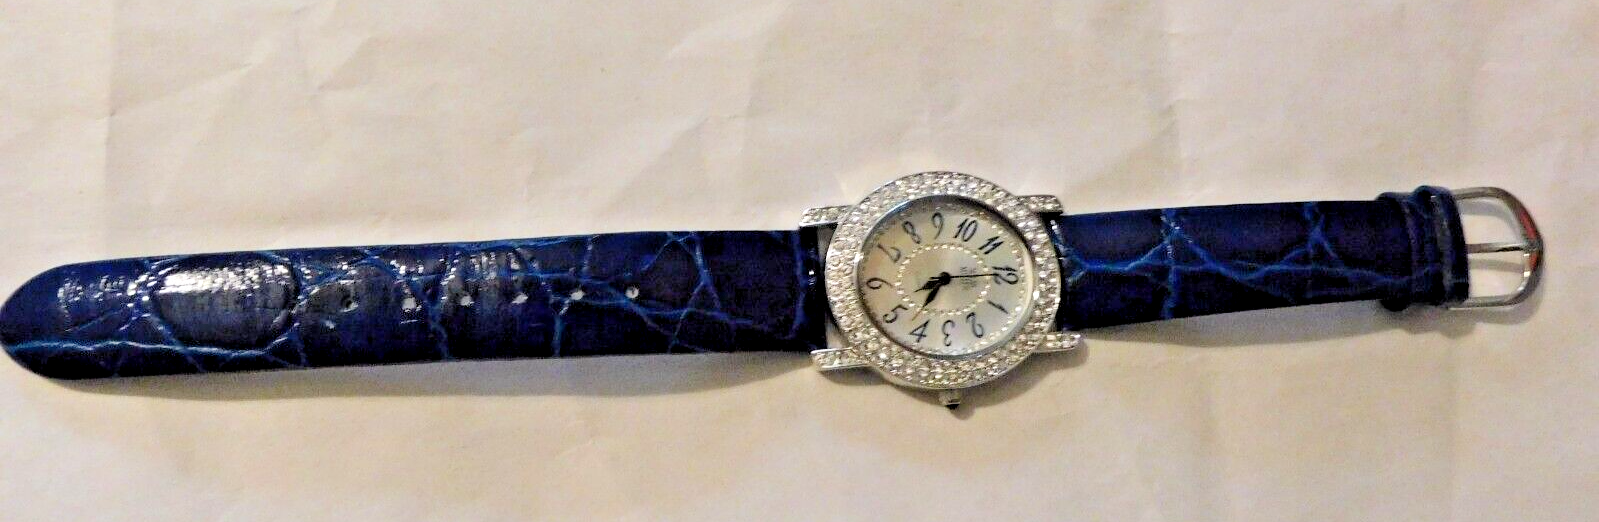 Primary image for NOLAN MILLER Vintage Watch with Pave Crystals Blue Leather Band Silver Tone EUVC